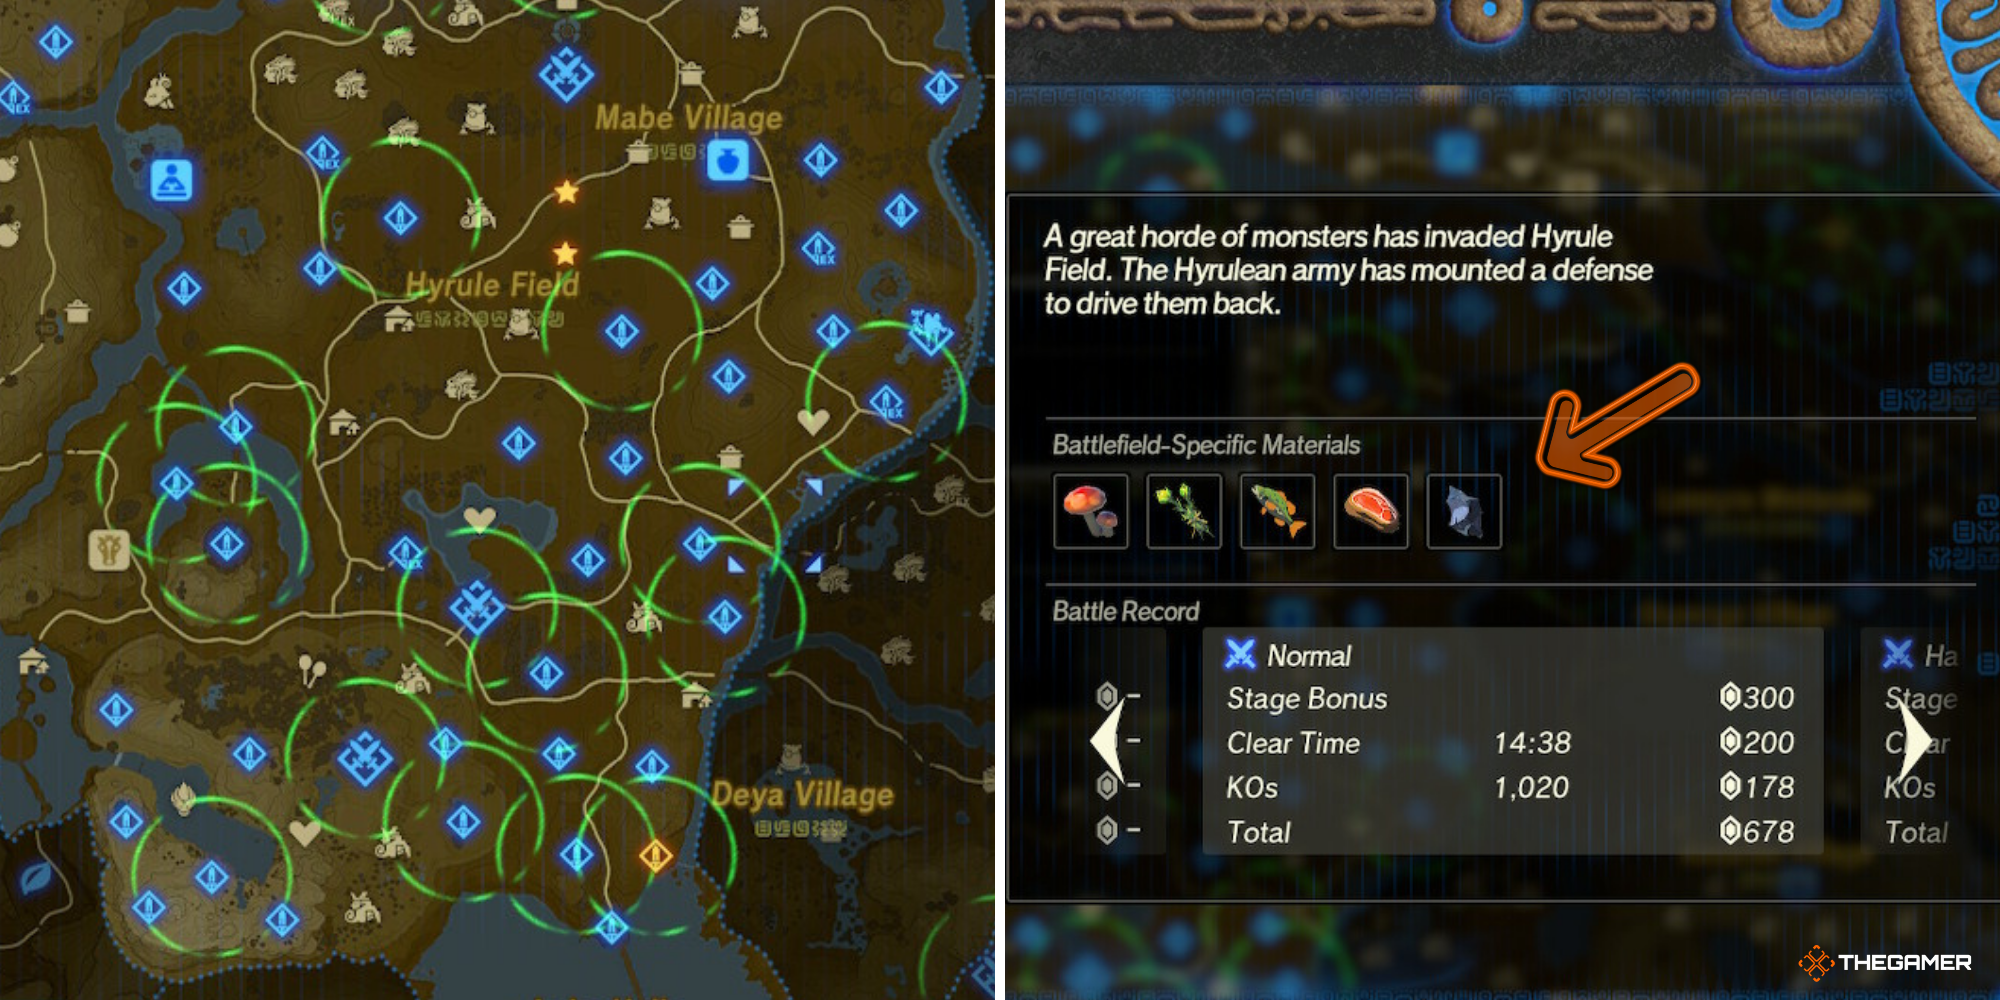 Age of Calamity - Sheikah Sensor active on map on left, Battlefield-Specific Materials on right